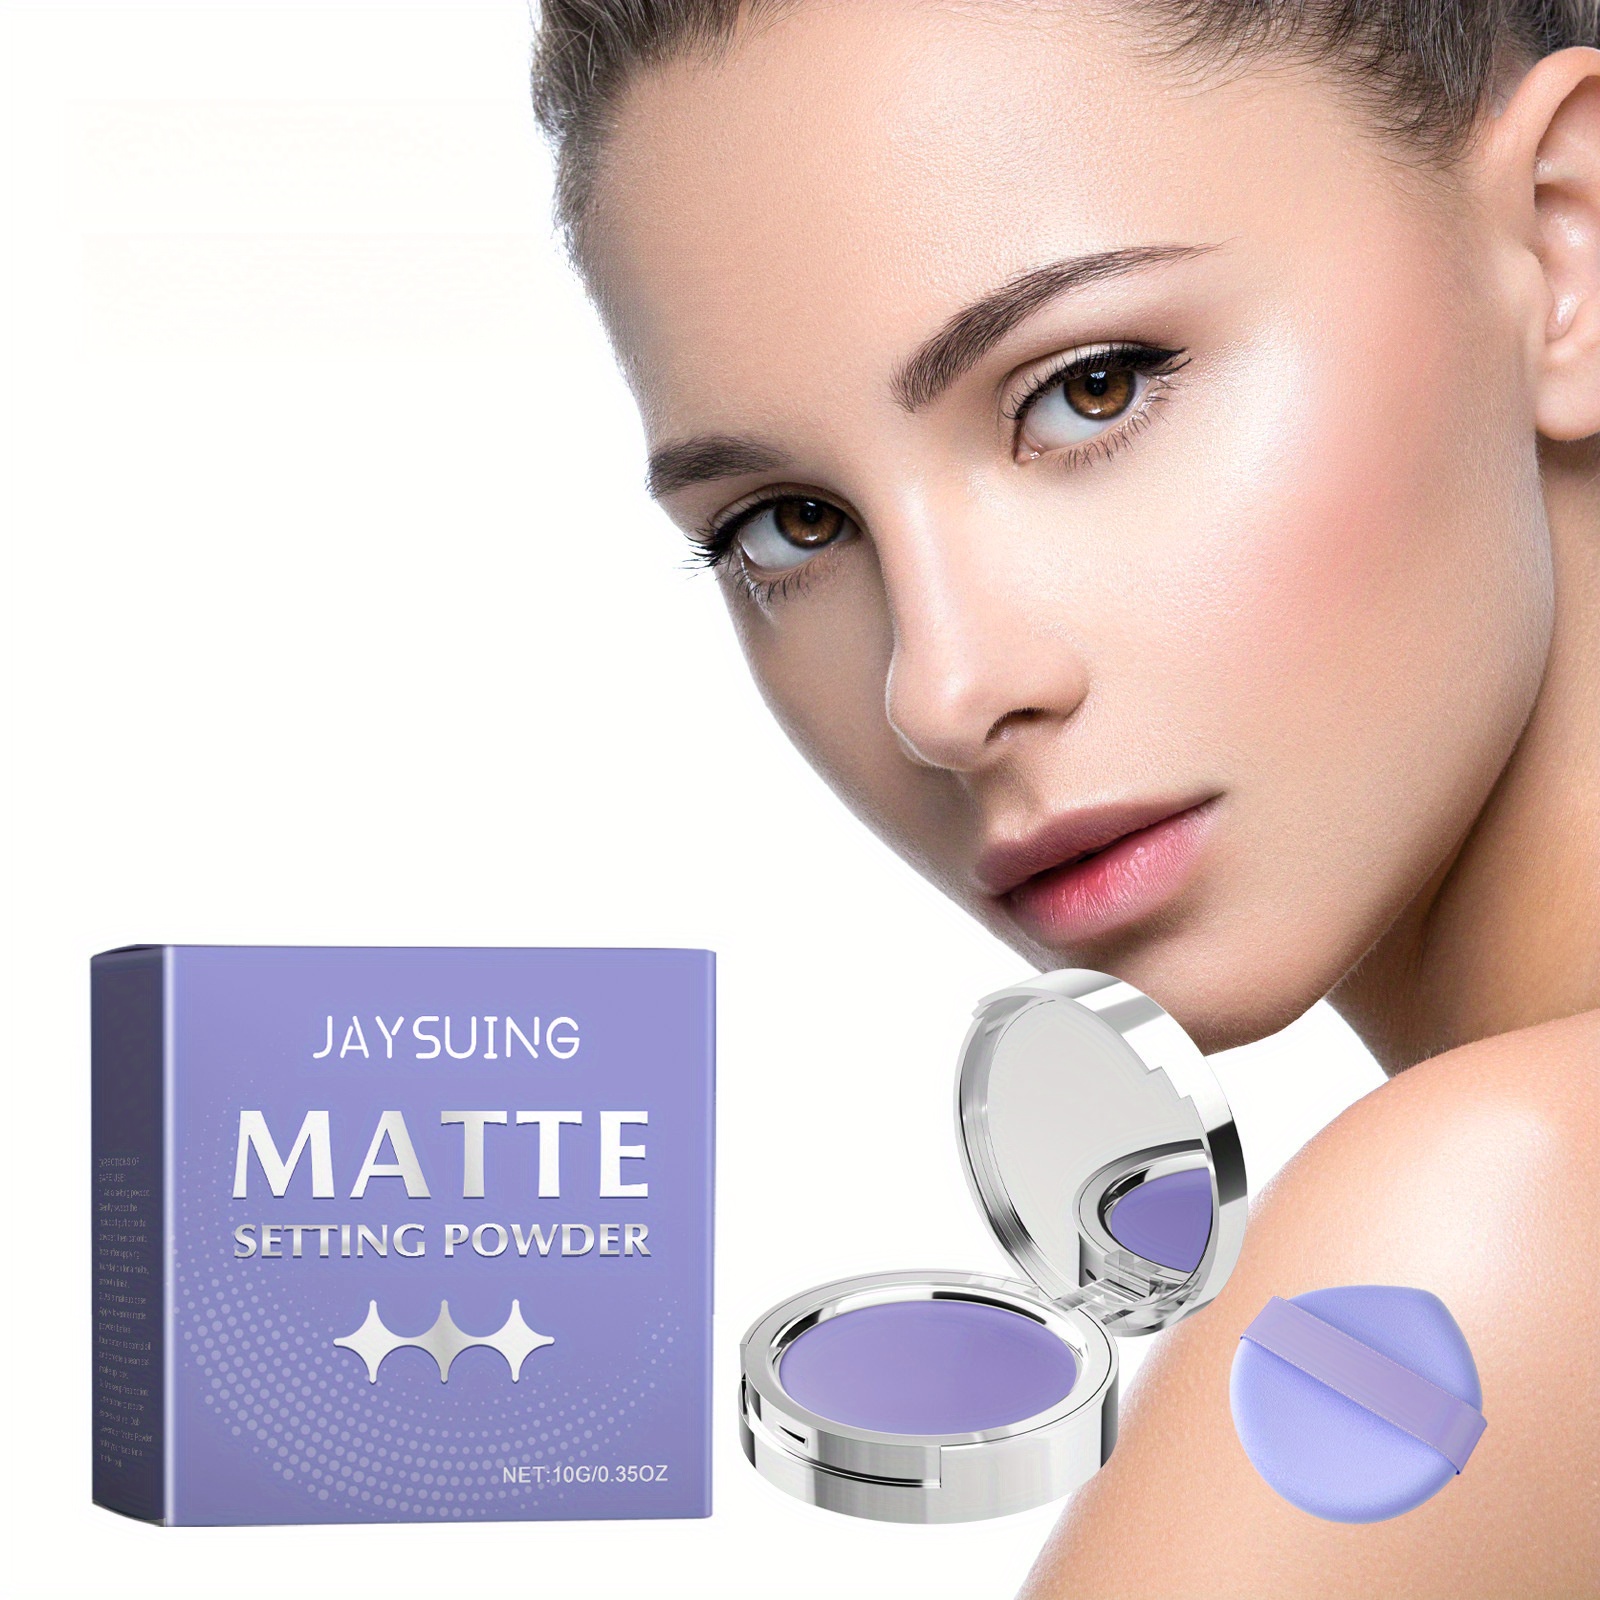 

Matte Setting Powder Compact, Natural Long-lasting Concealer, Oil-control, Lightweight, Anti-sweat, Non-caking Makeup With Lavender & Centella Asiatica Extracts, 0.35oz Plant Squalane